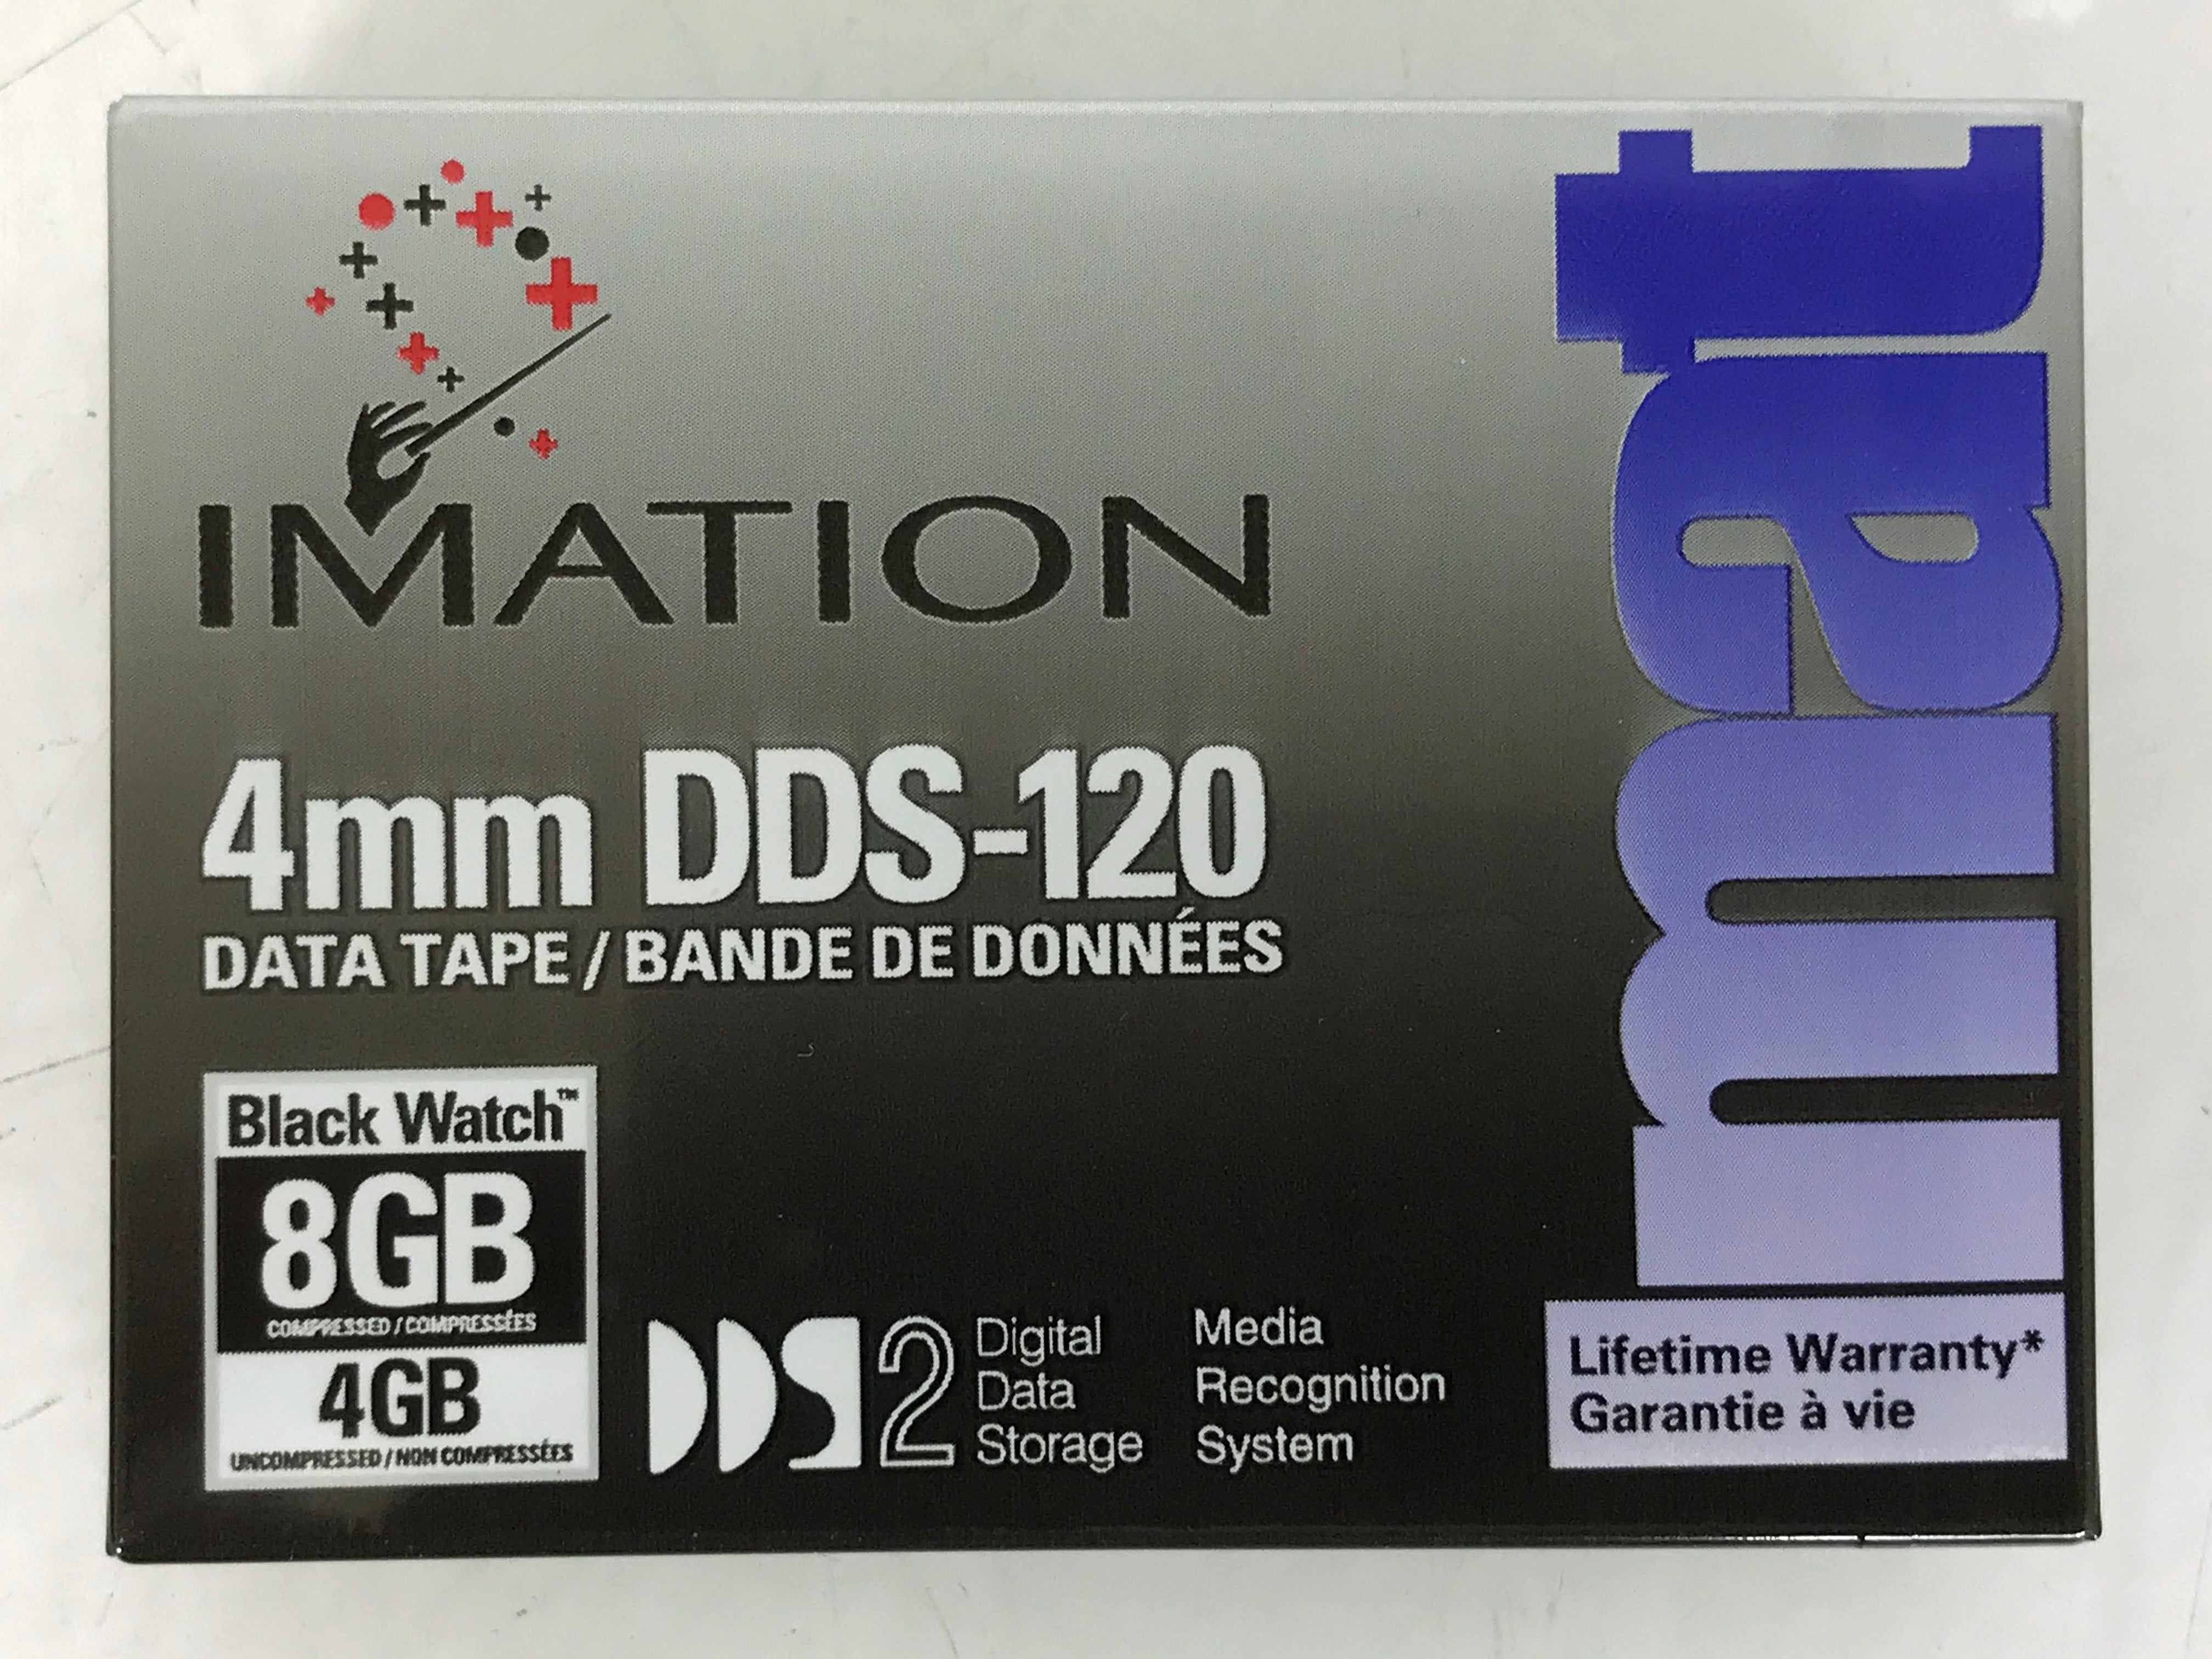 Imation 10-Pack 4mm DDS-120 Data Tape